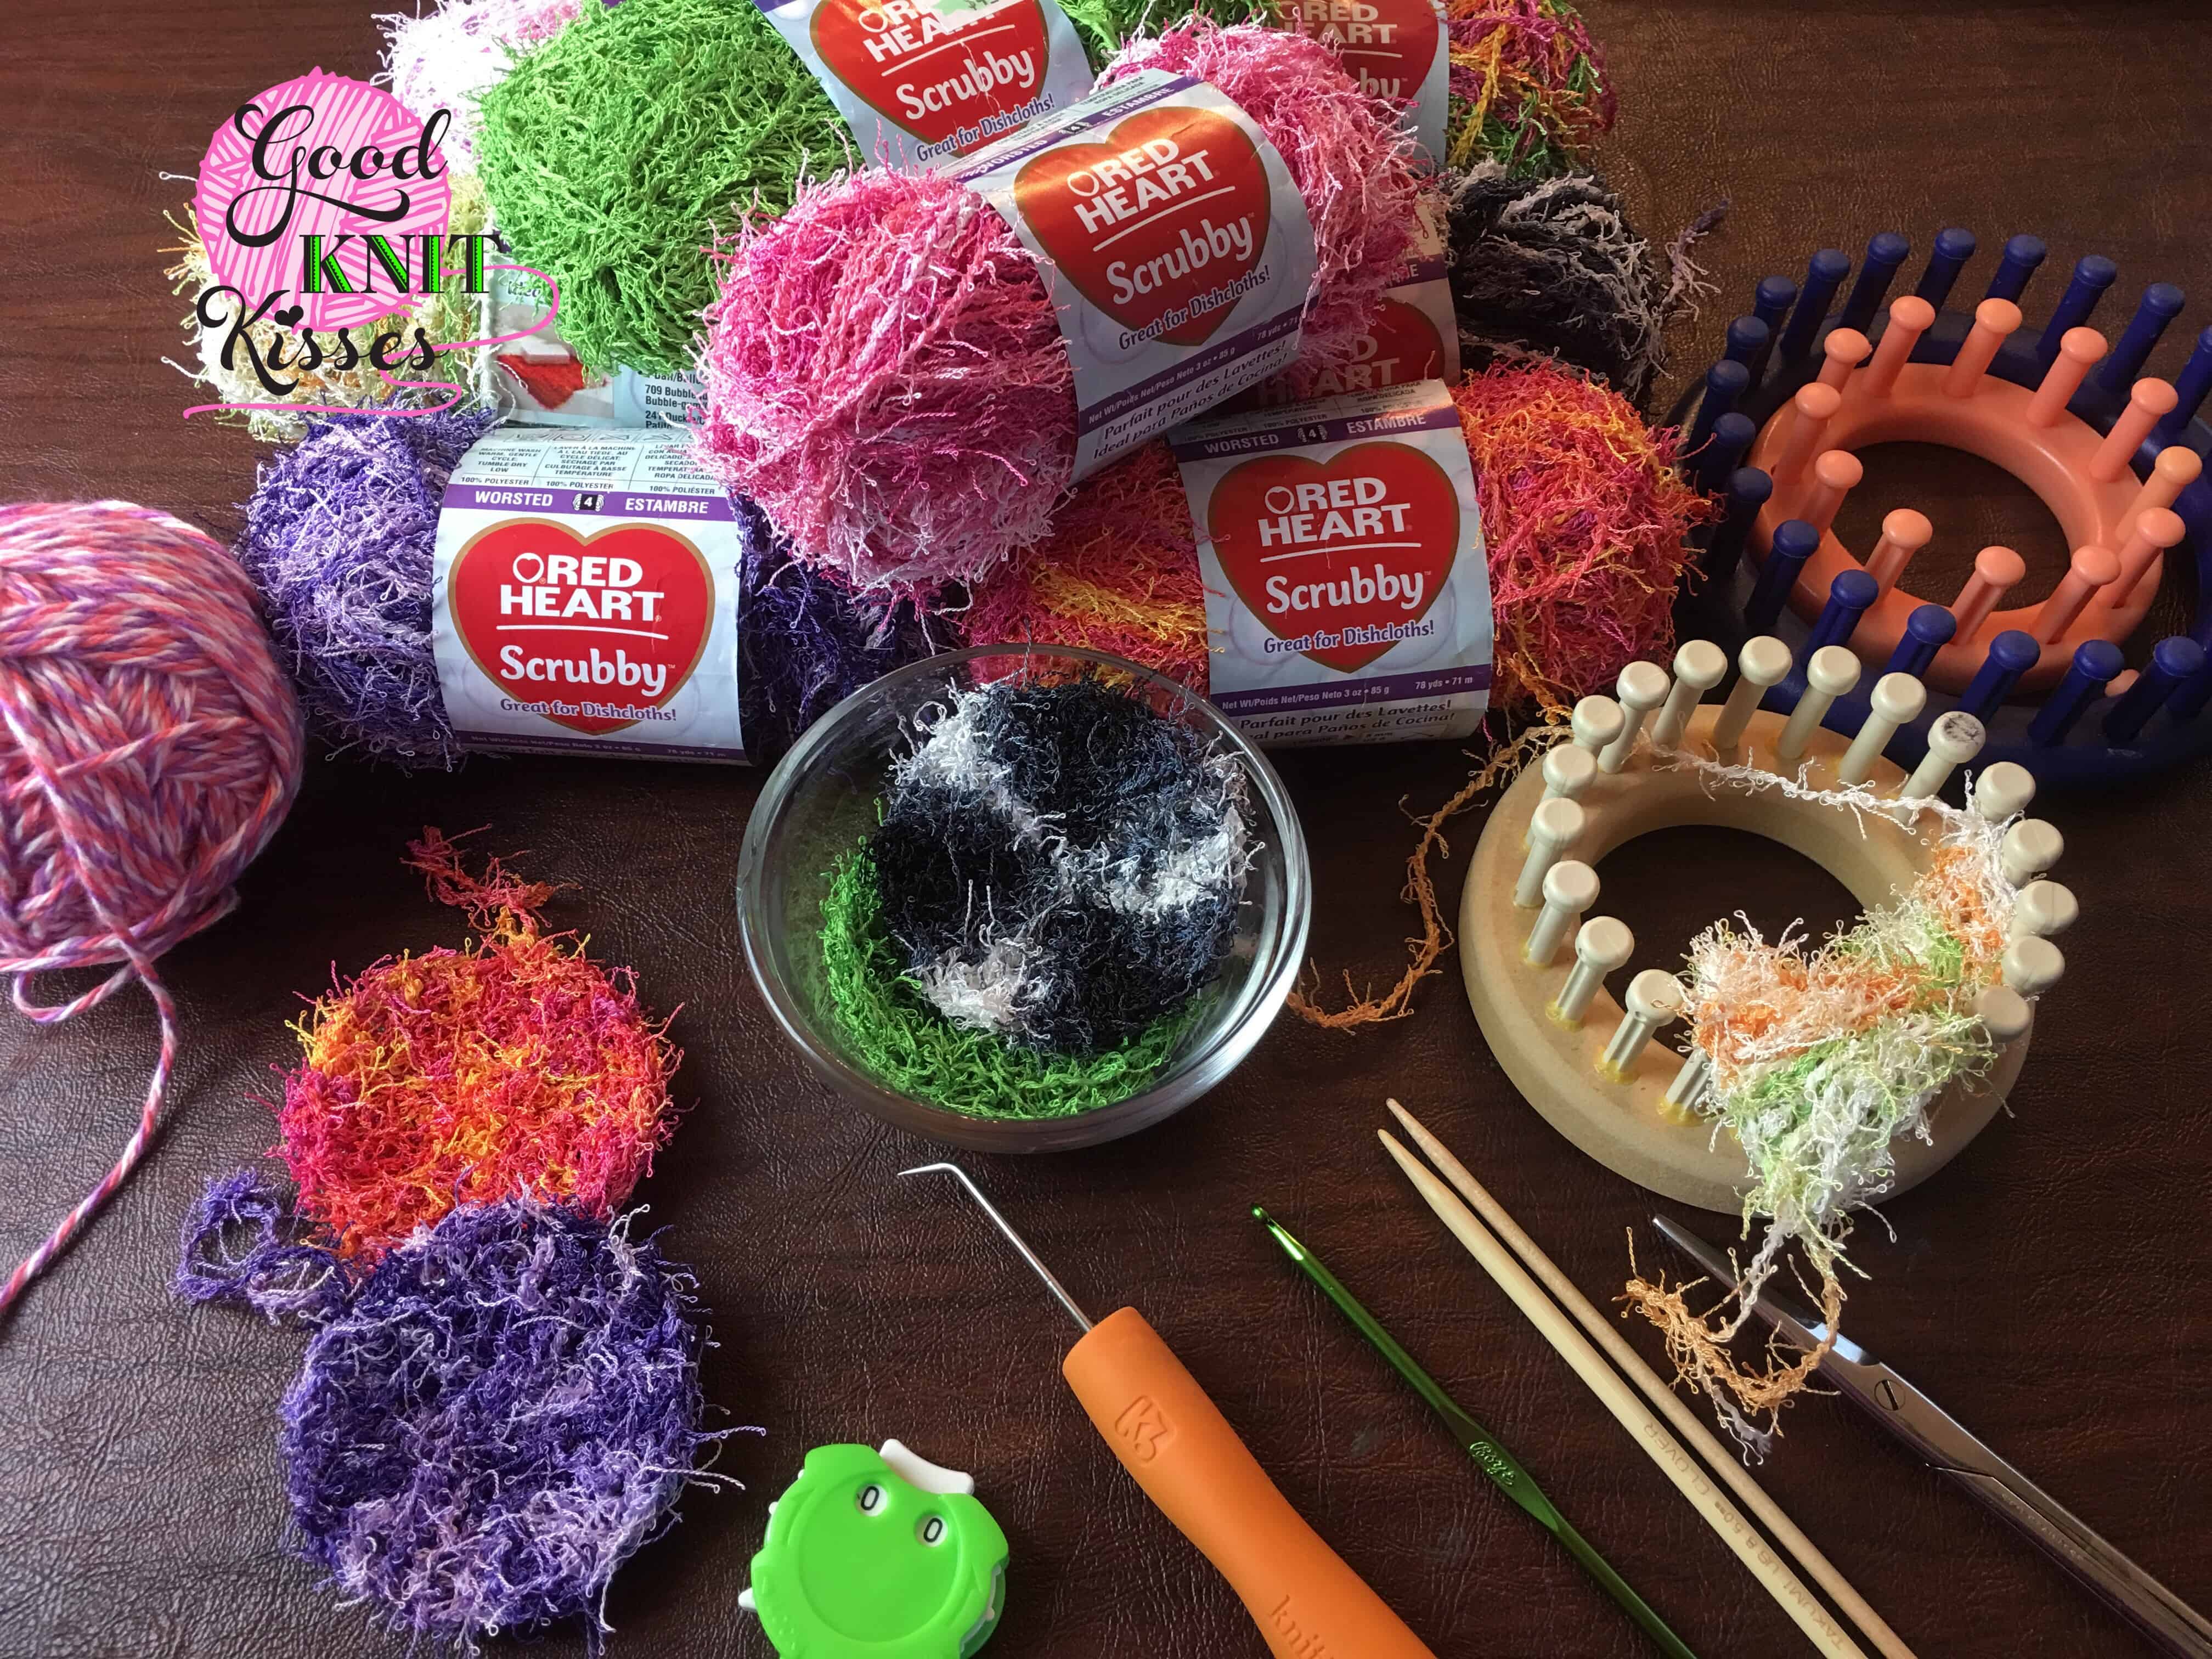 Knit and Crochet Flowers in Red Heart Scrubby Yarns